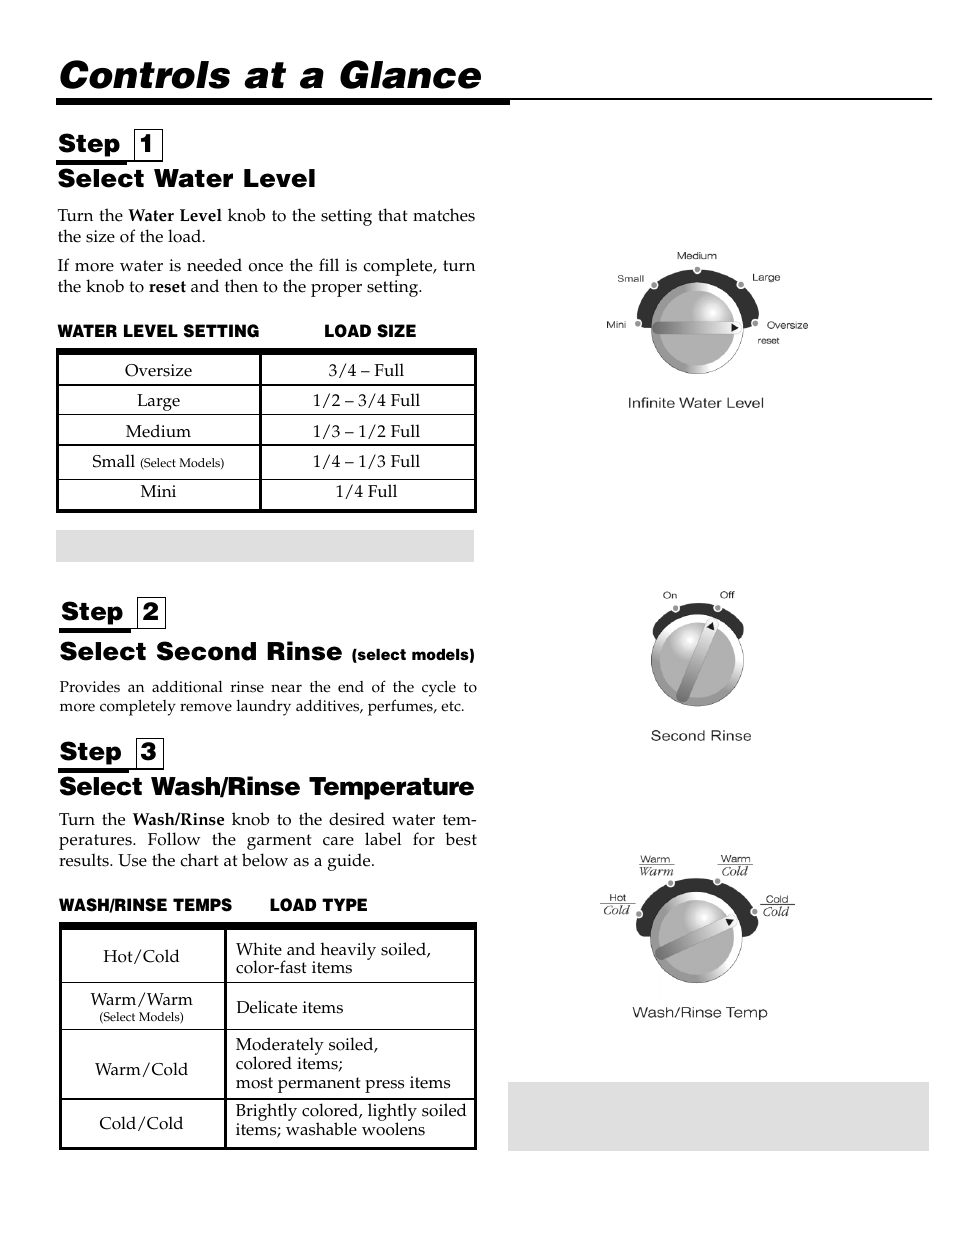 Controls at a glance, Step 3 step 1, Select wash/rinse temperature | Select water level, Step 2 select second rinse | Maytag LAT2500AAE User Manual | Page 4 / 28